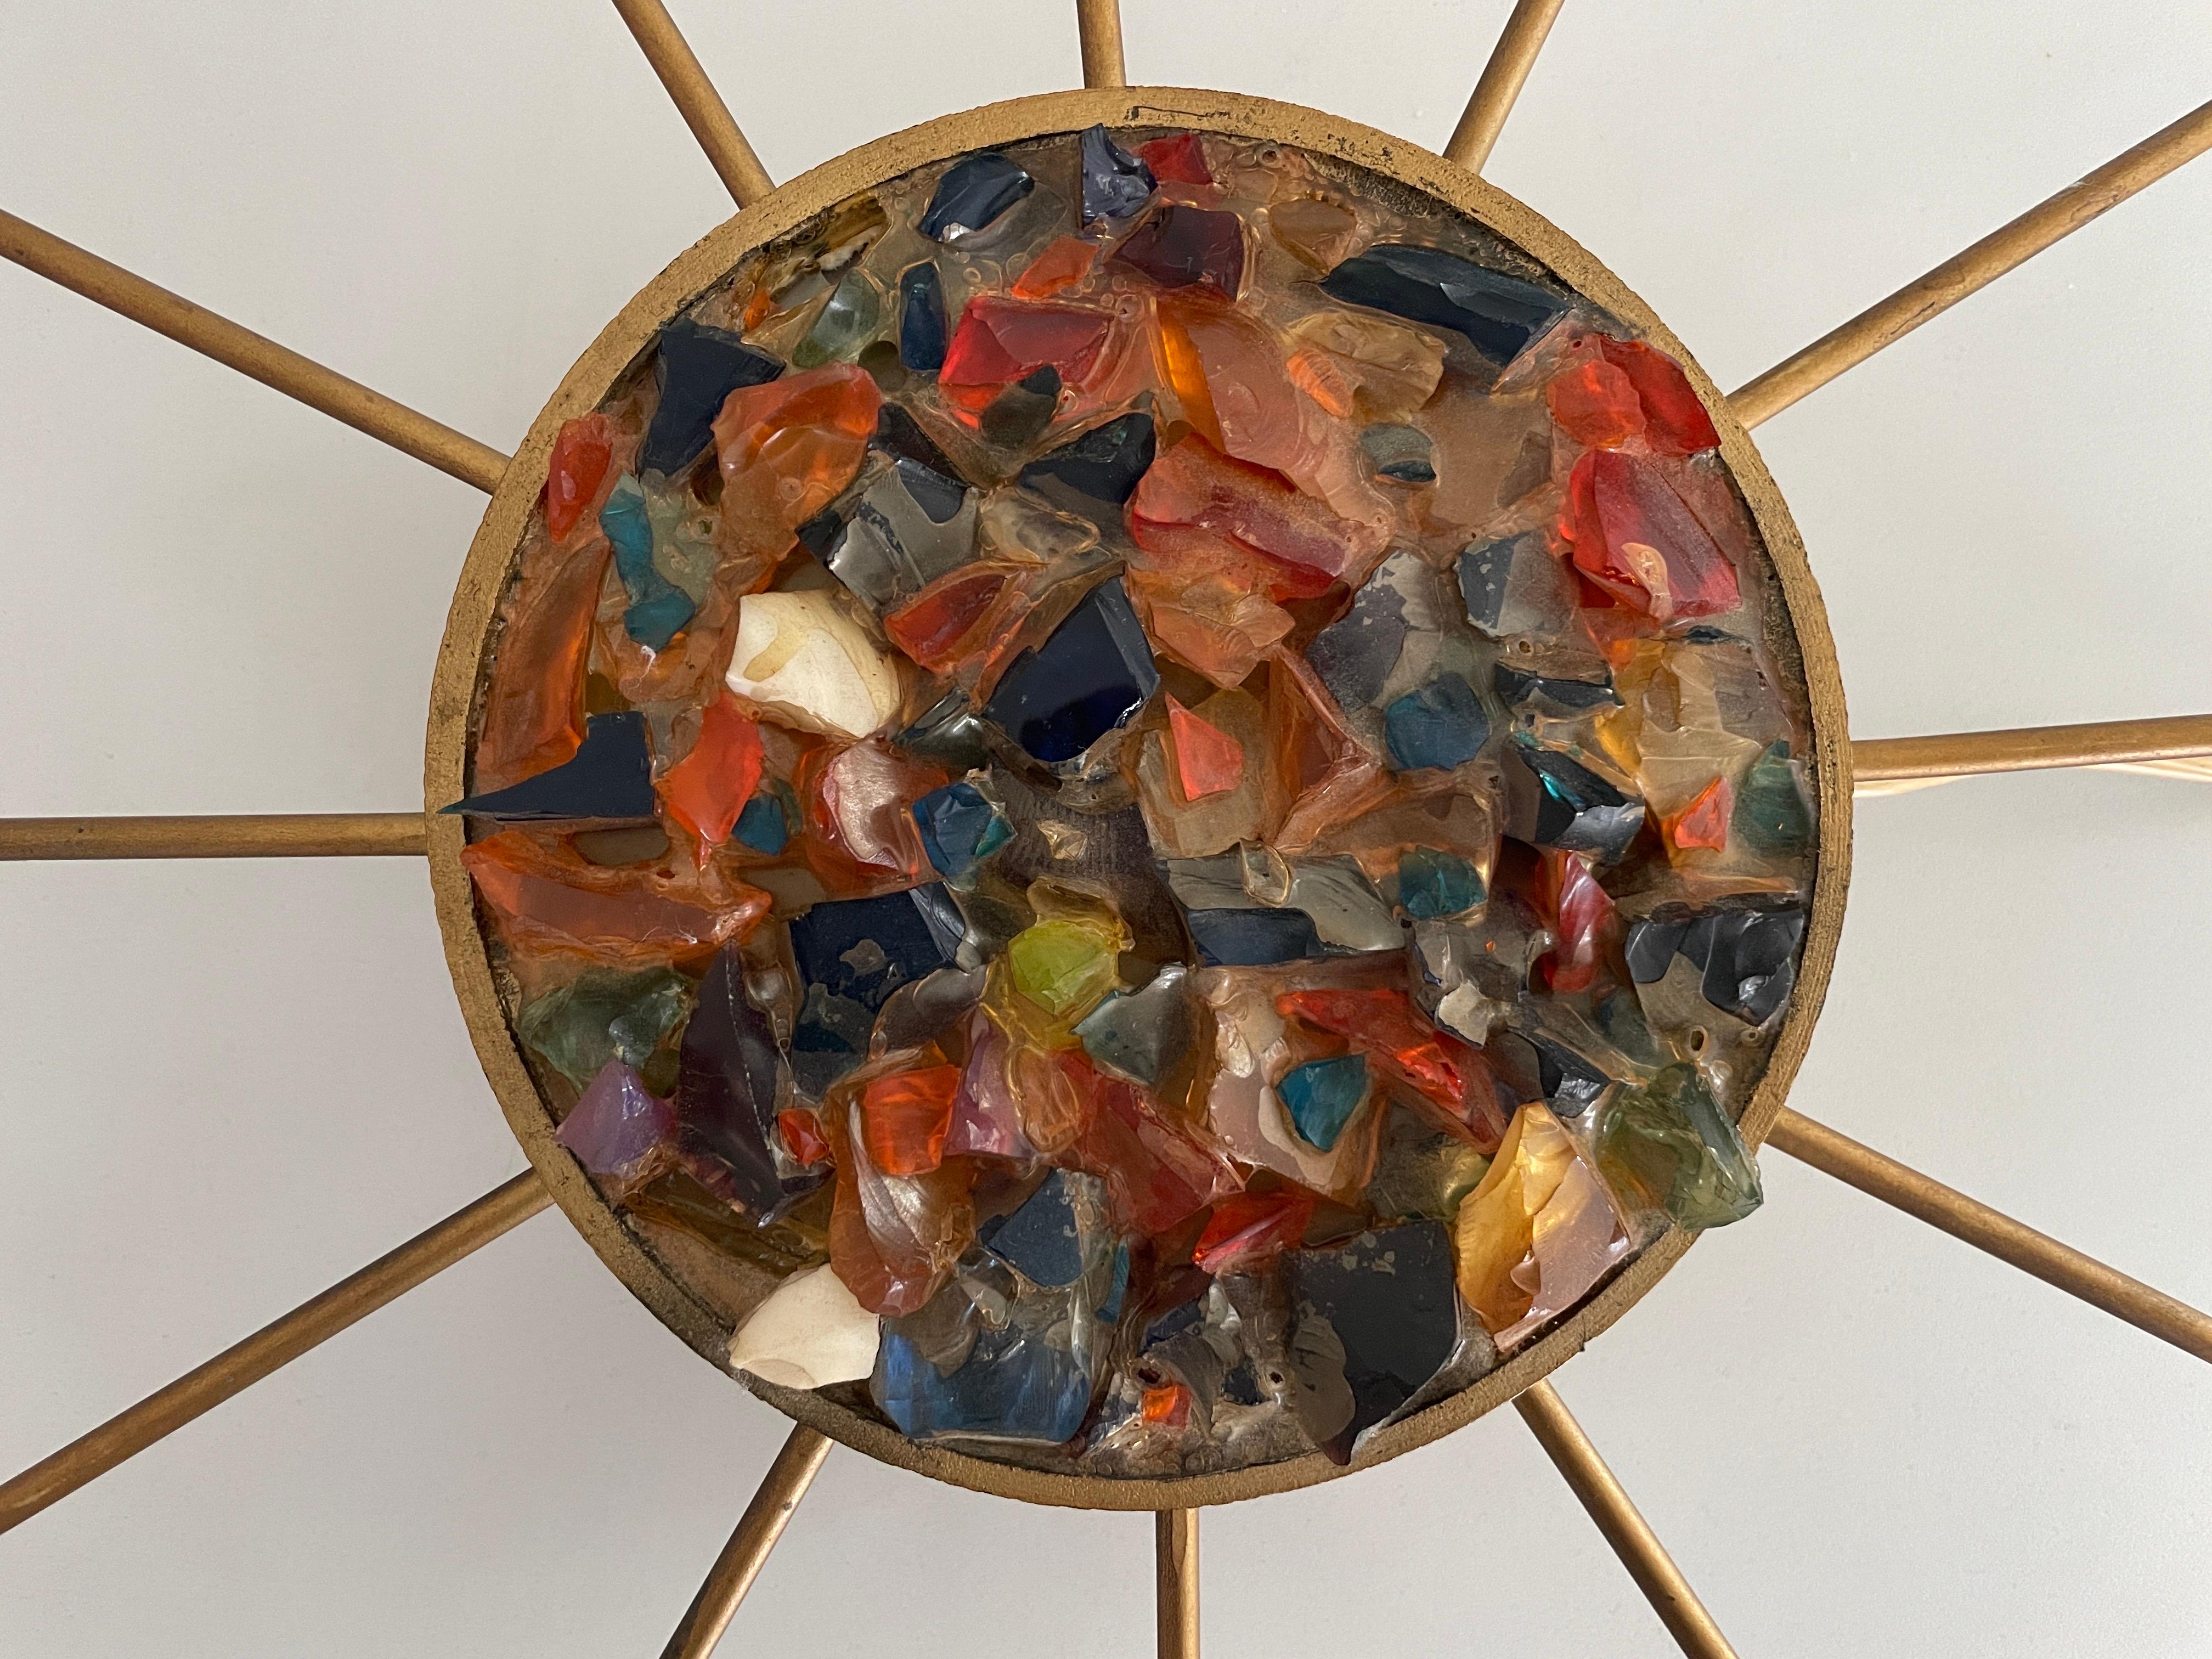 Sunburst Design Colorful Glass Pieces in Stone Form Wall Lamp, 1960s, Germany For Sale 9